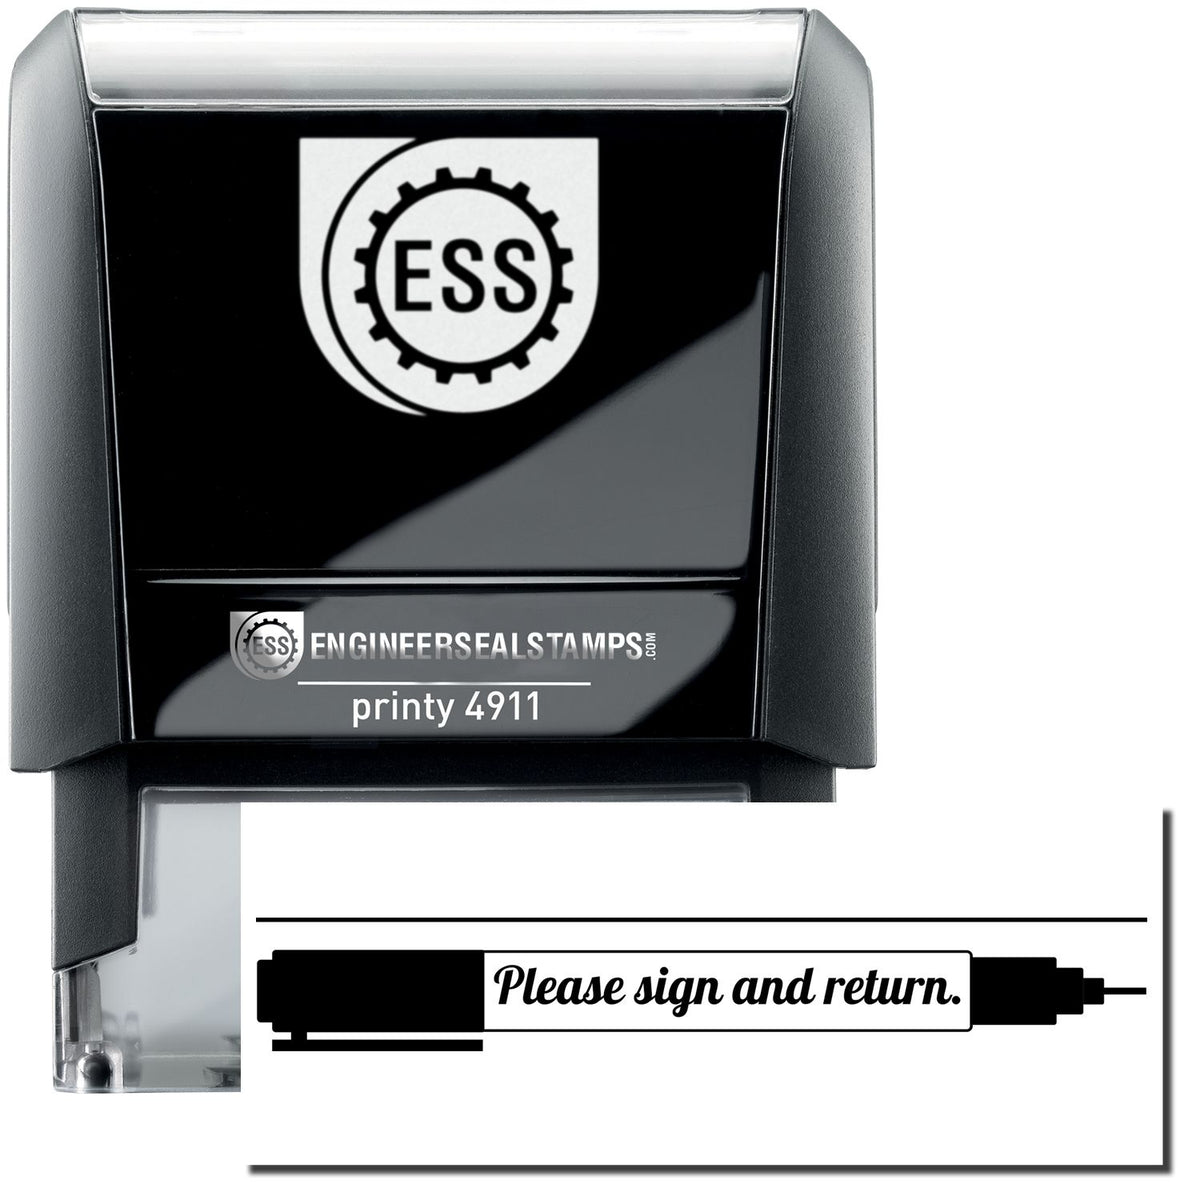 A self-inking stamp with a stamped image showing how the text &quot;Please sign and return.&quot; (with an image of a pen and a line on the top of the text) is displayed after stamping.